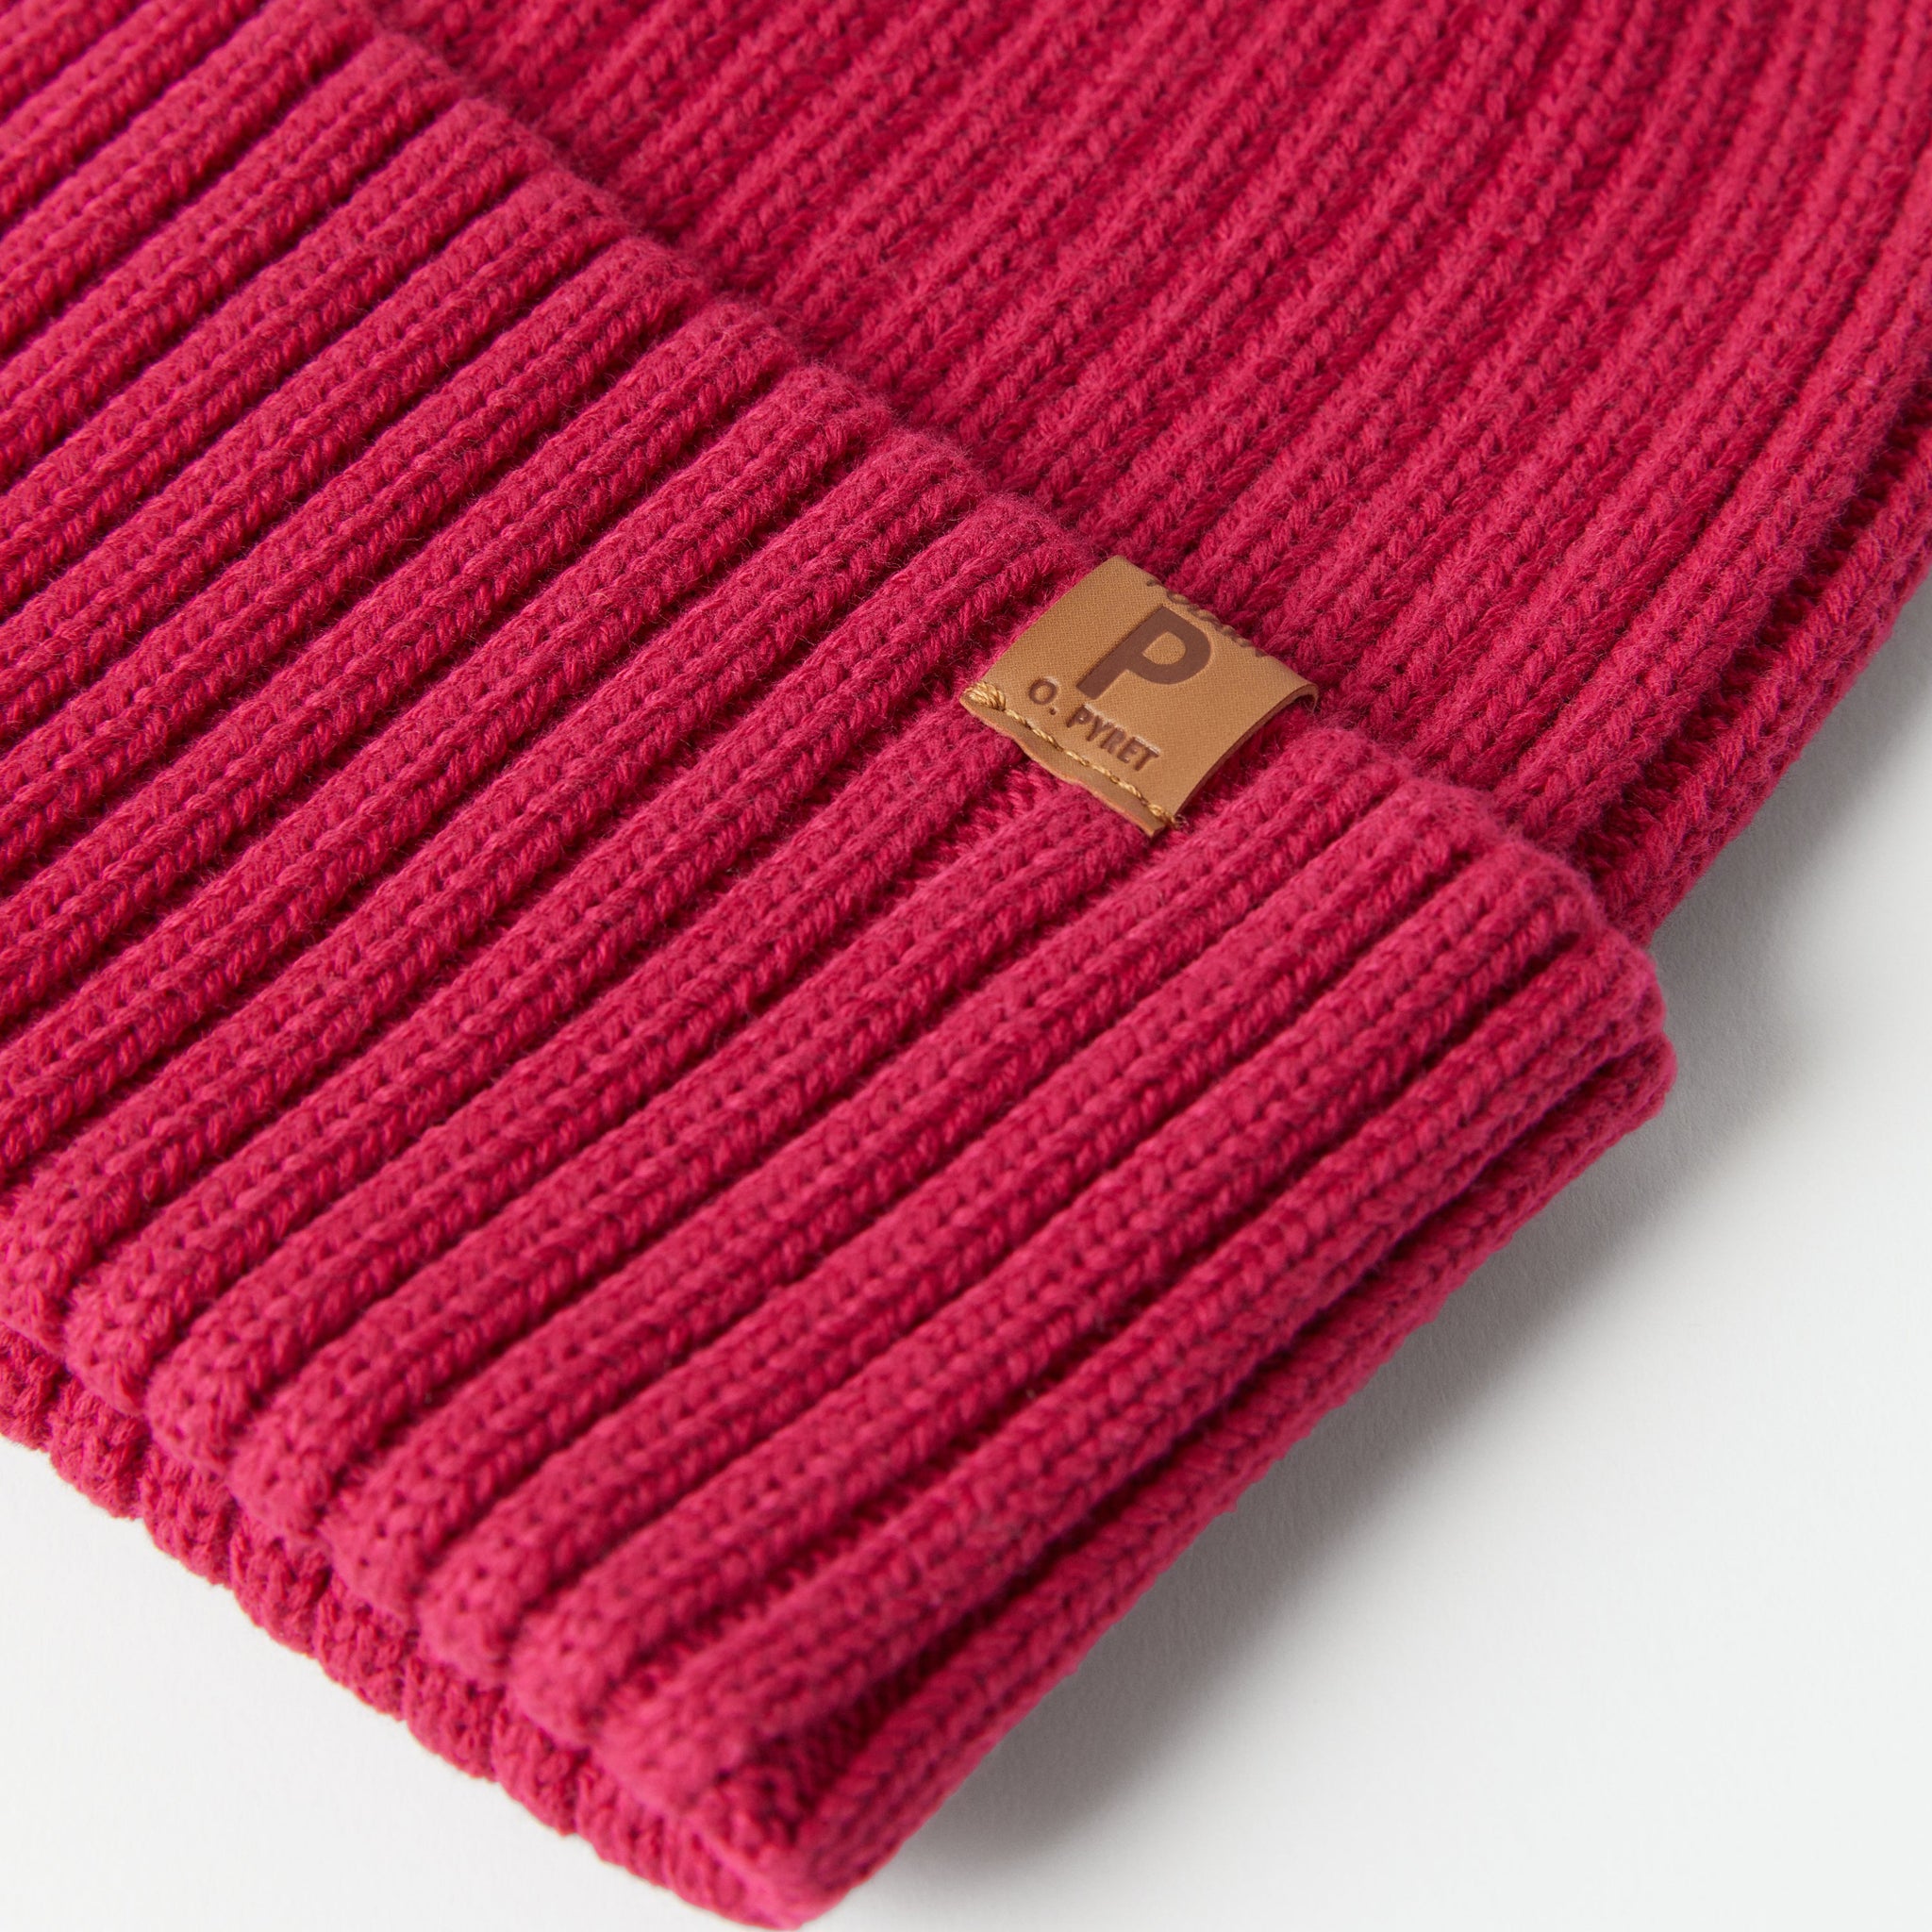 Red Kids Knitted Hat from the Polarn O. Pyret kidswear collection. The best ethical kids outerwear.